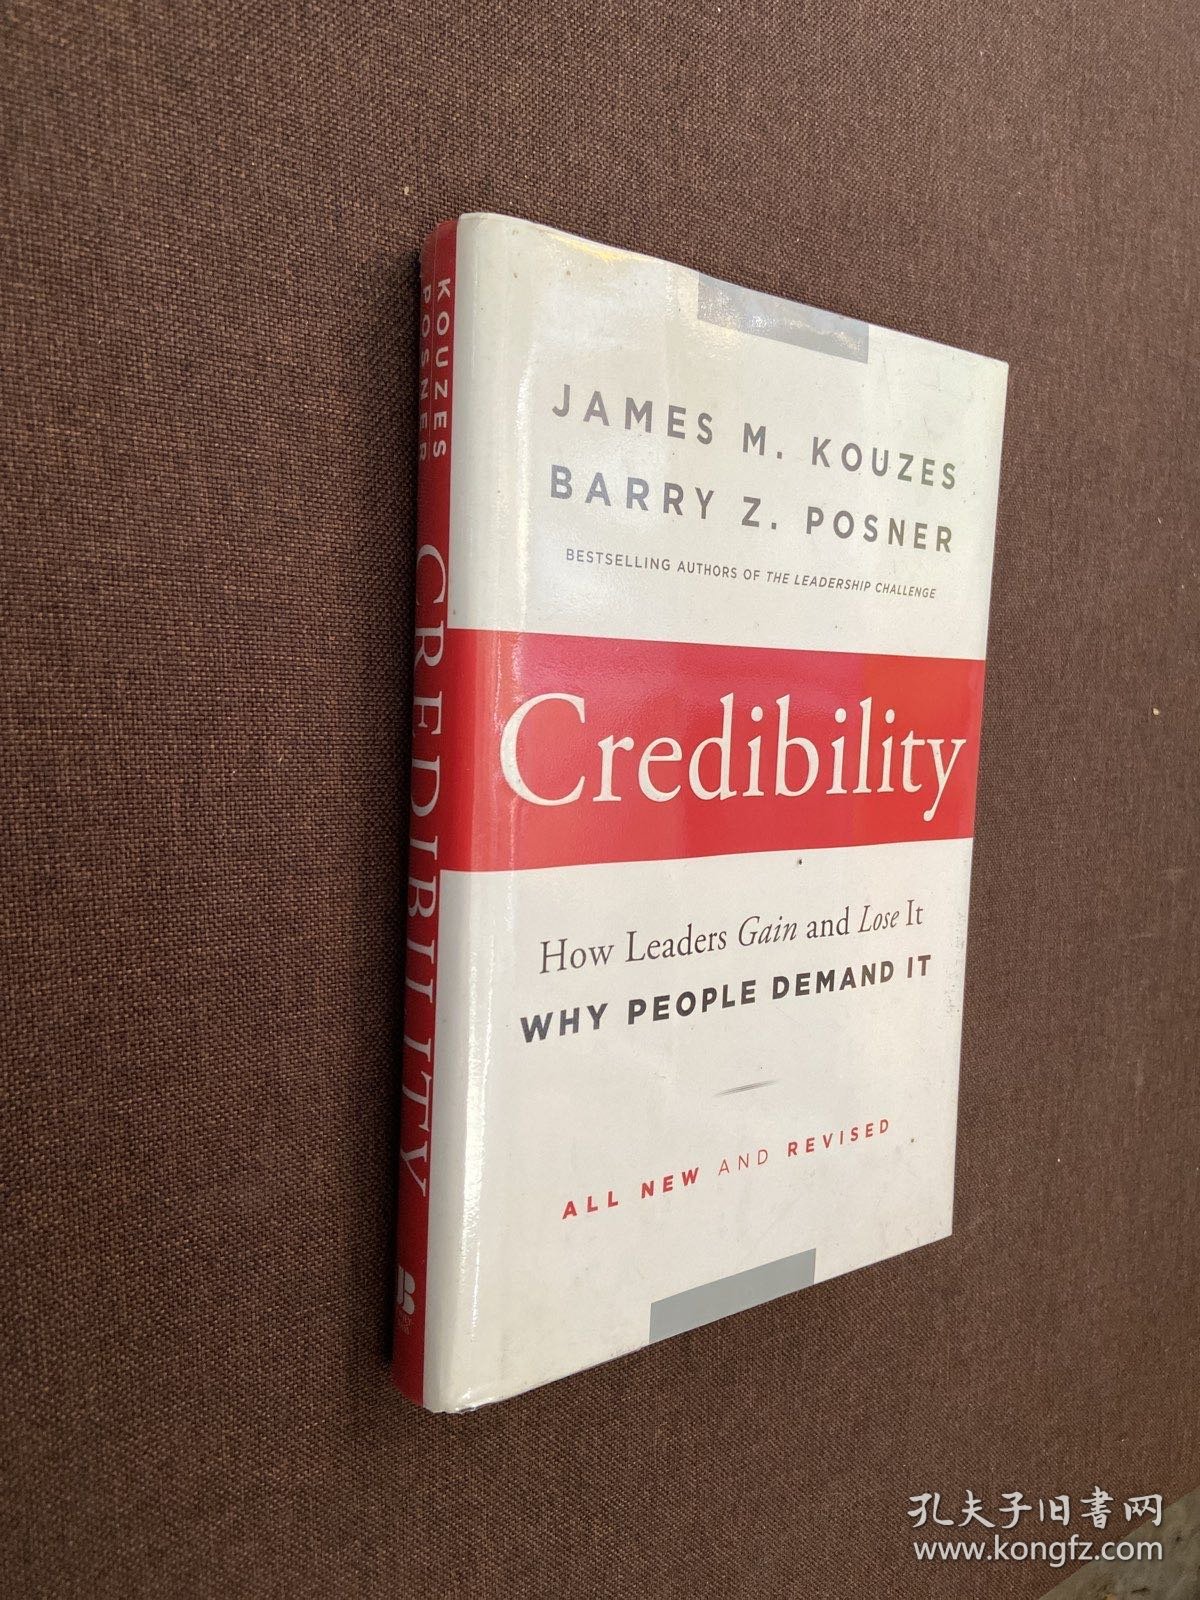 Credibility: How Leaders Gain and Lose It, Why People Demand It [信誉：领导者如何与为何得与失 第2版]